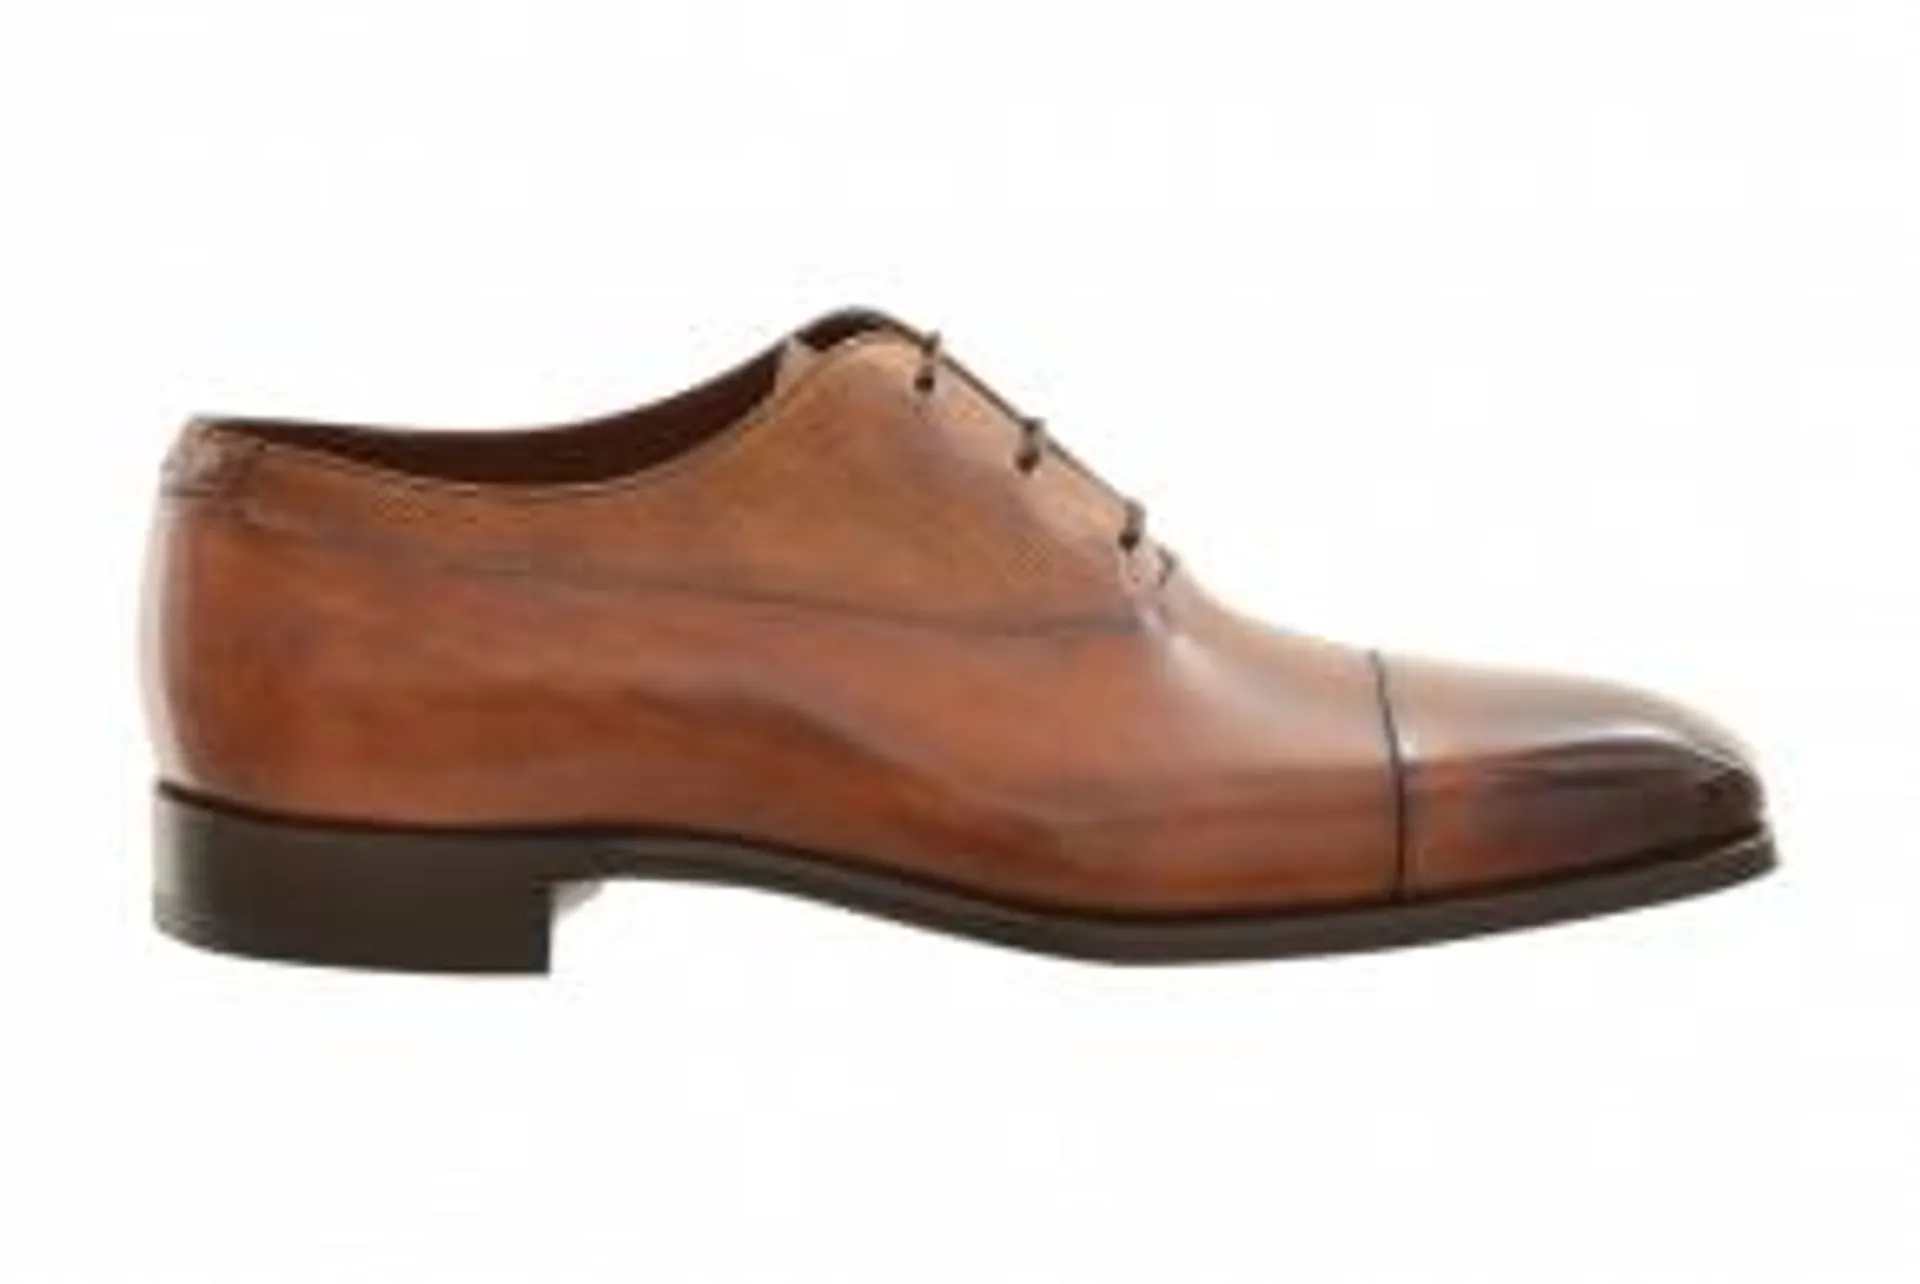 Magnanni Exotic Oxford Combo Lace-Up